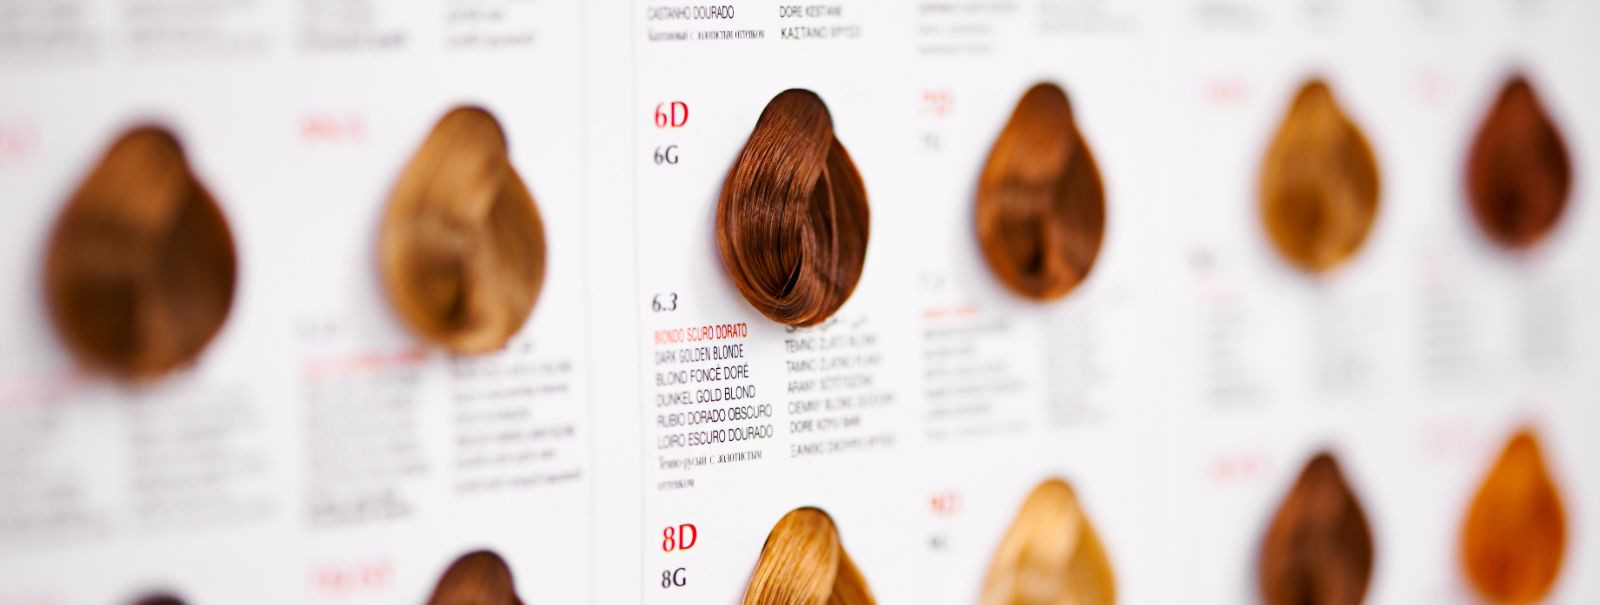 Hair color is not just a matter of aesthetics; it's a science. The natural pigment in our hair, melanin, determines the base color, which can be altered through